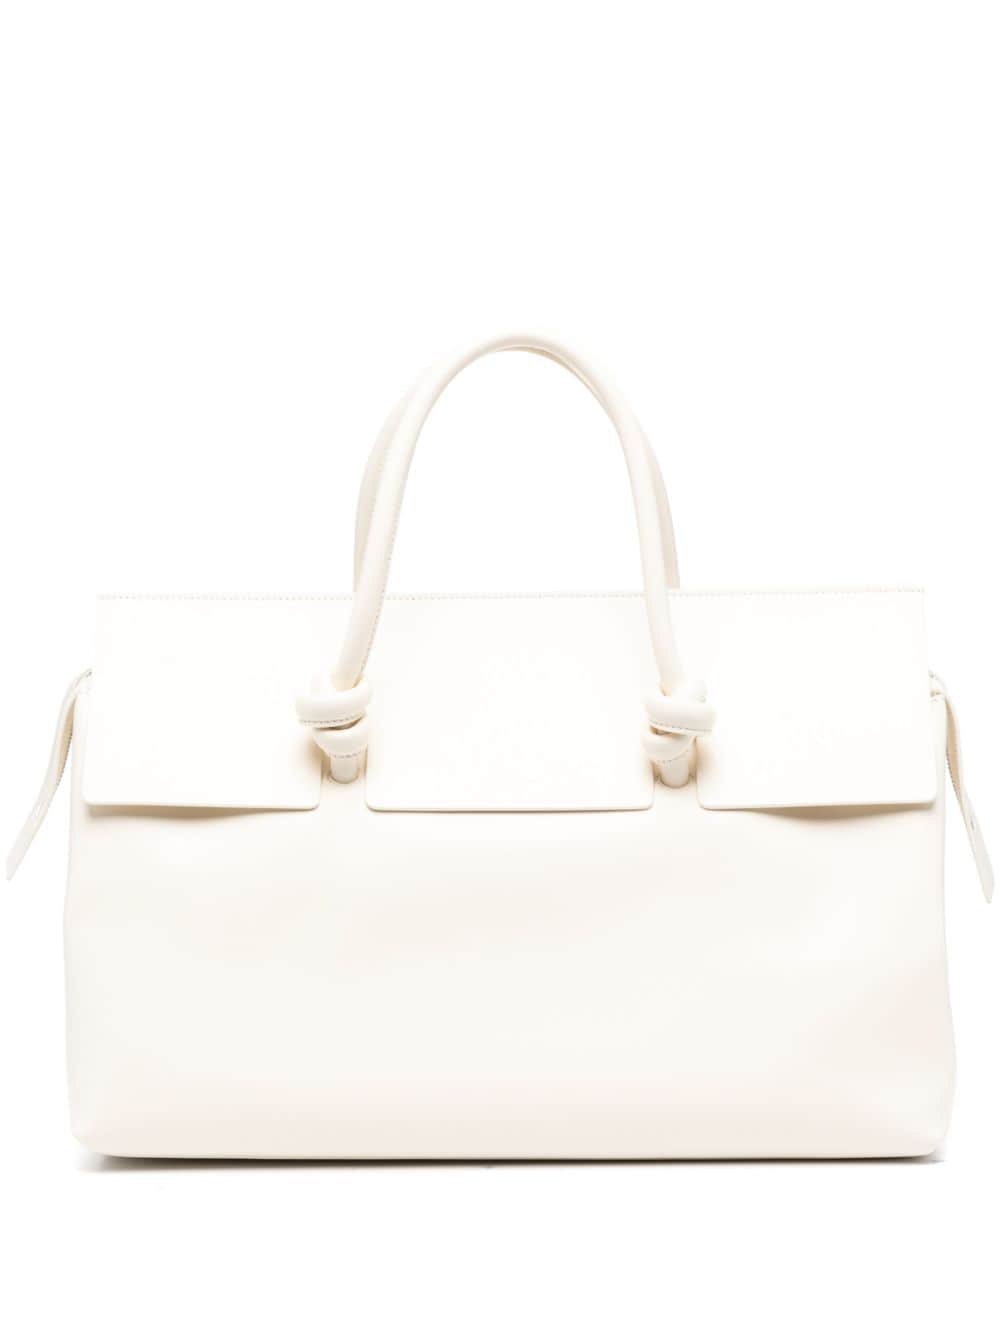 Jil Sander Knot Leather Tote Bag In Neutral